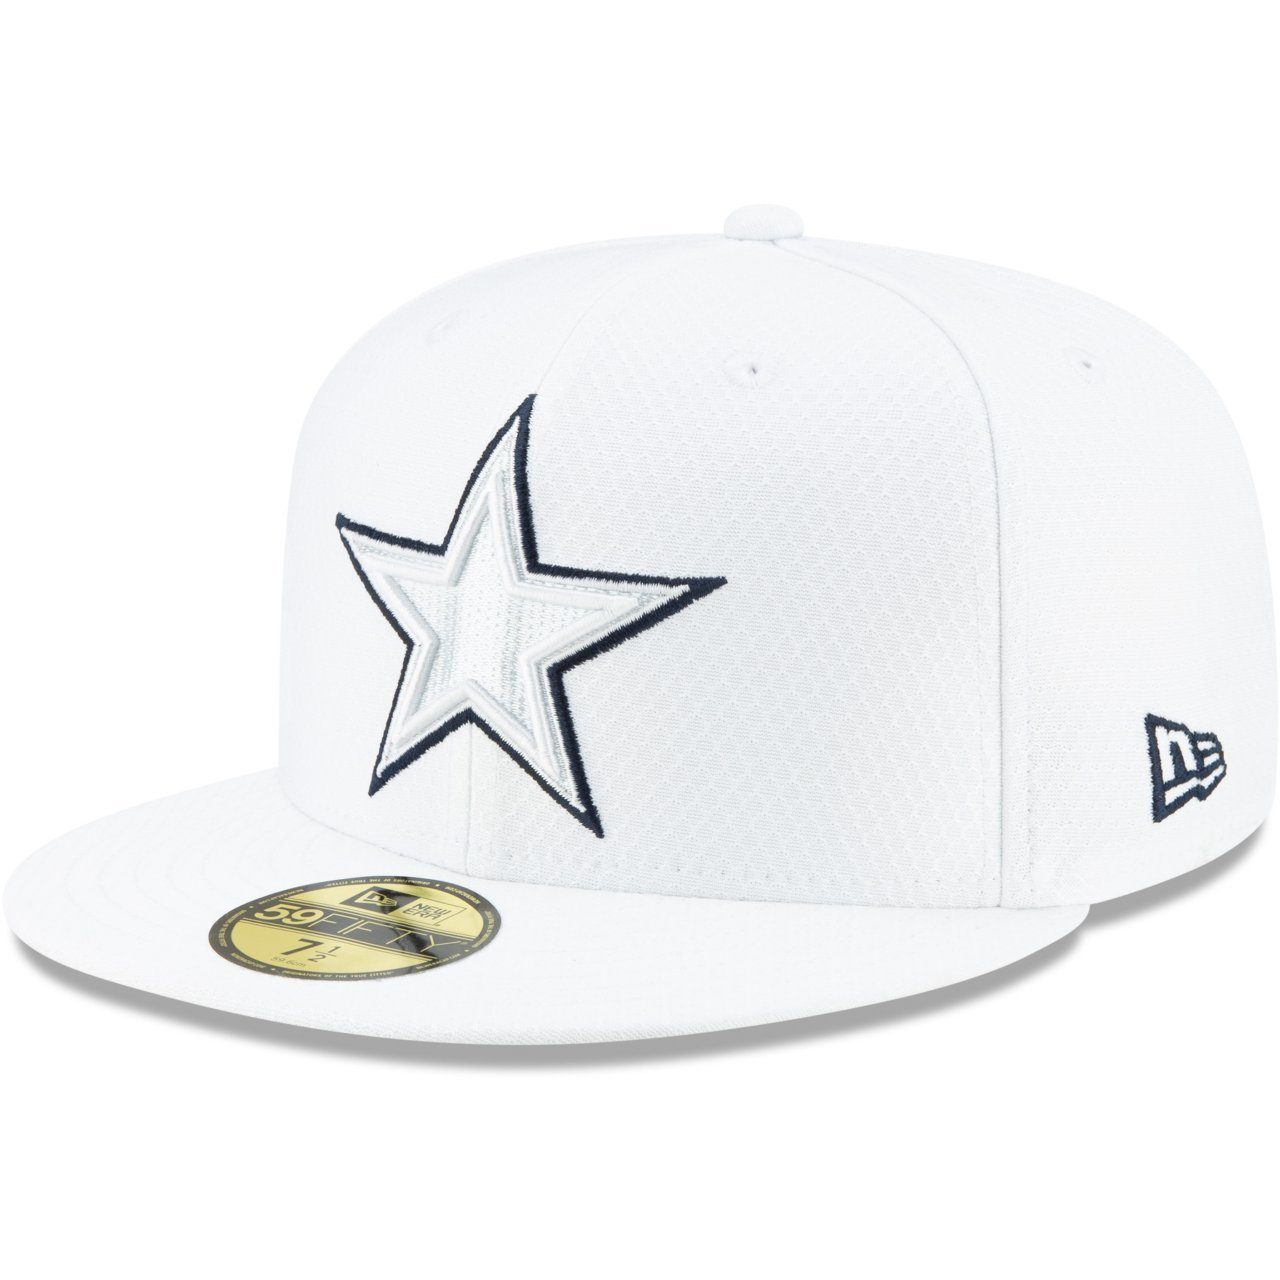 New Era Fitted Cap 59Fifty PLATINUM NFL Sideline Dallas Cowboys